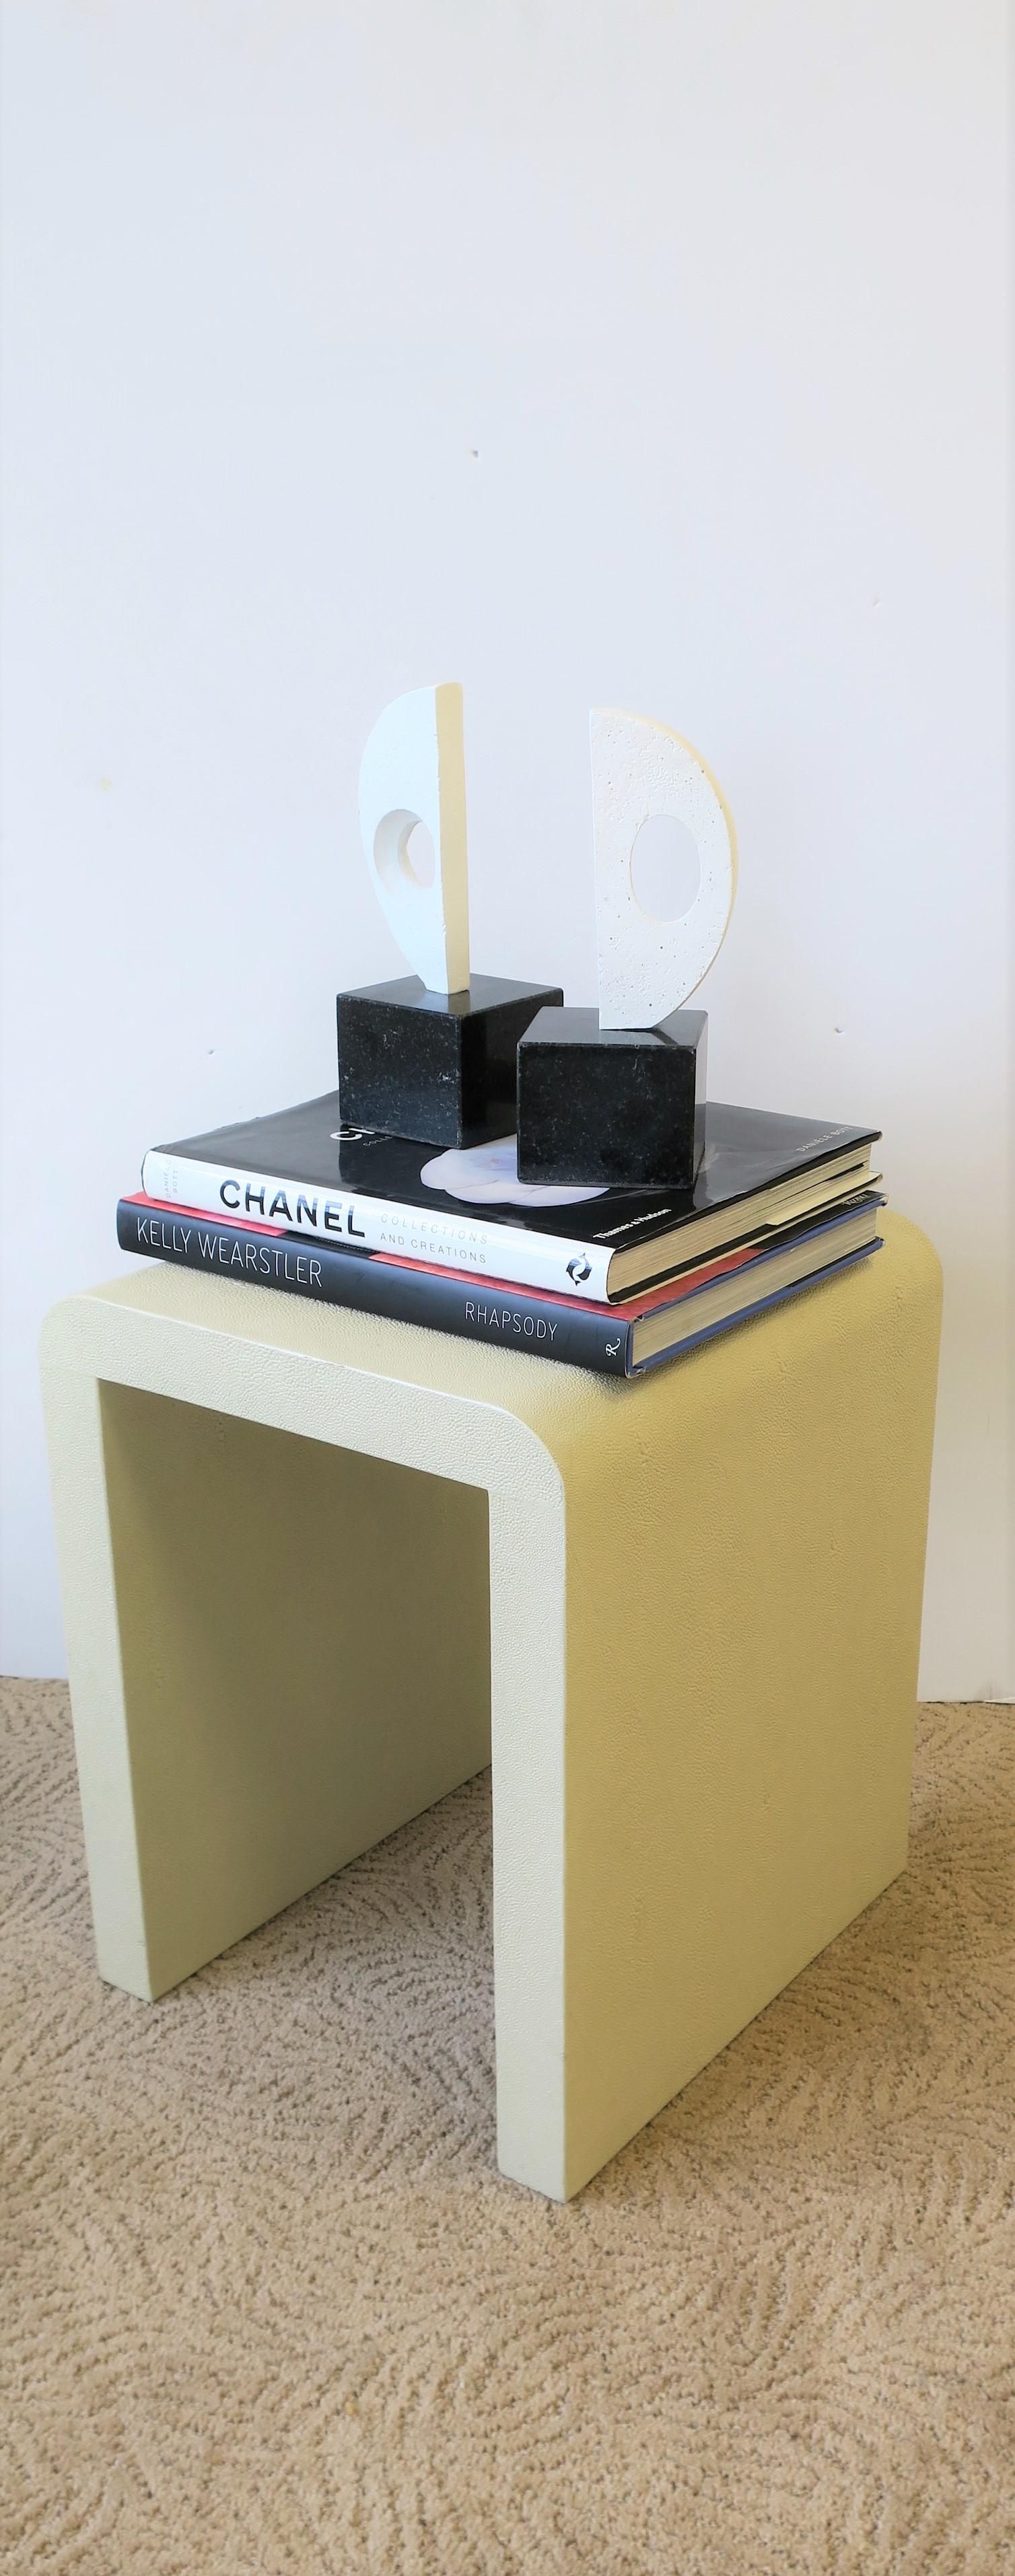 Granite Black and White Plaster Abstract Sculptures or Bookends on Marble Bases